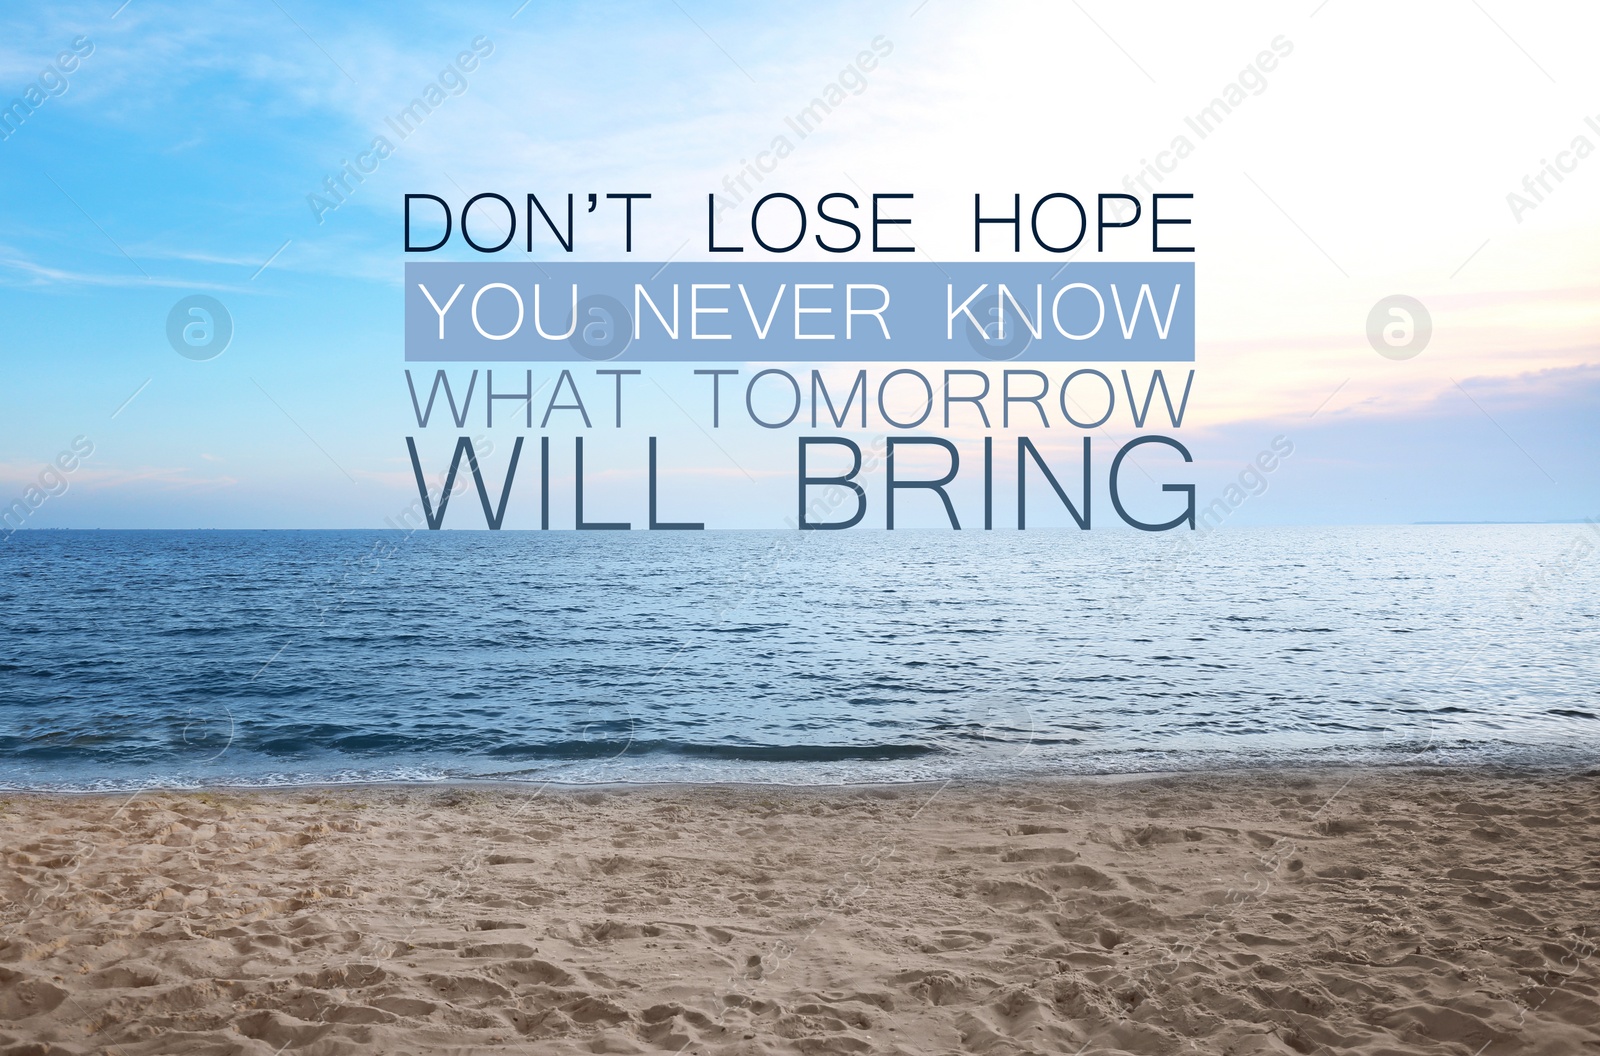 Image of Don't Lose Hope You Never Know What Tomorrow Will Bring. Inspirational quote saying about patience, belief in yourself and next day. Text against sandy beach and sea